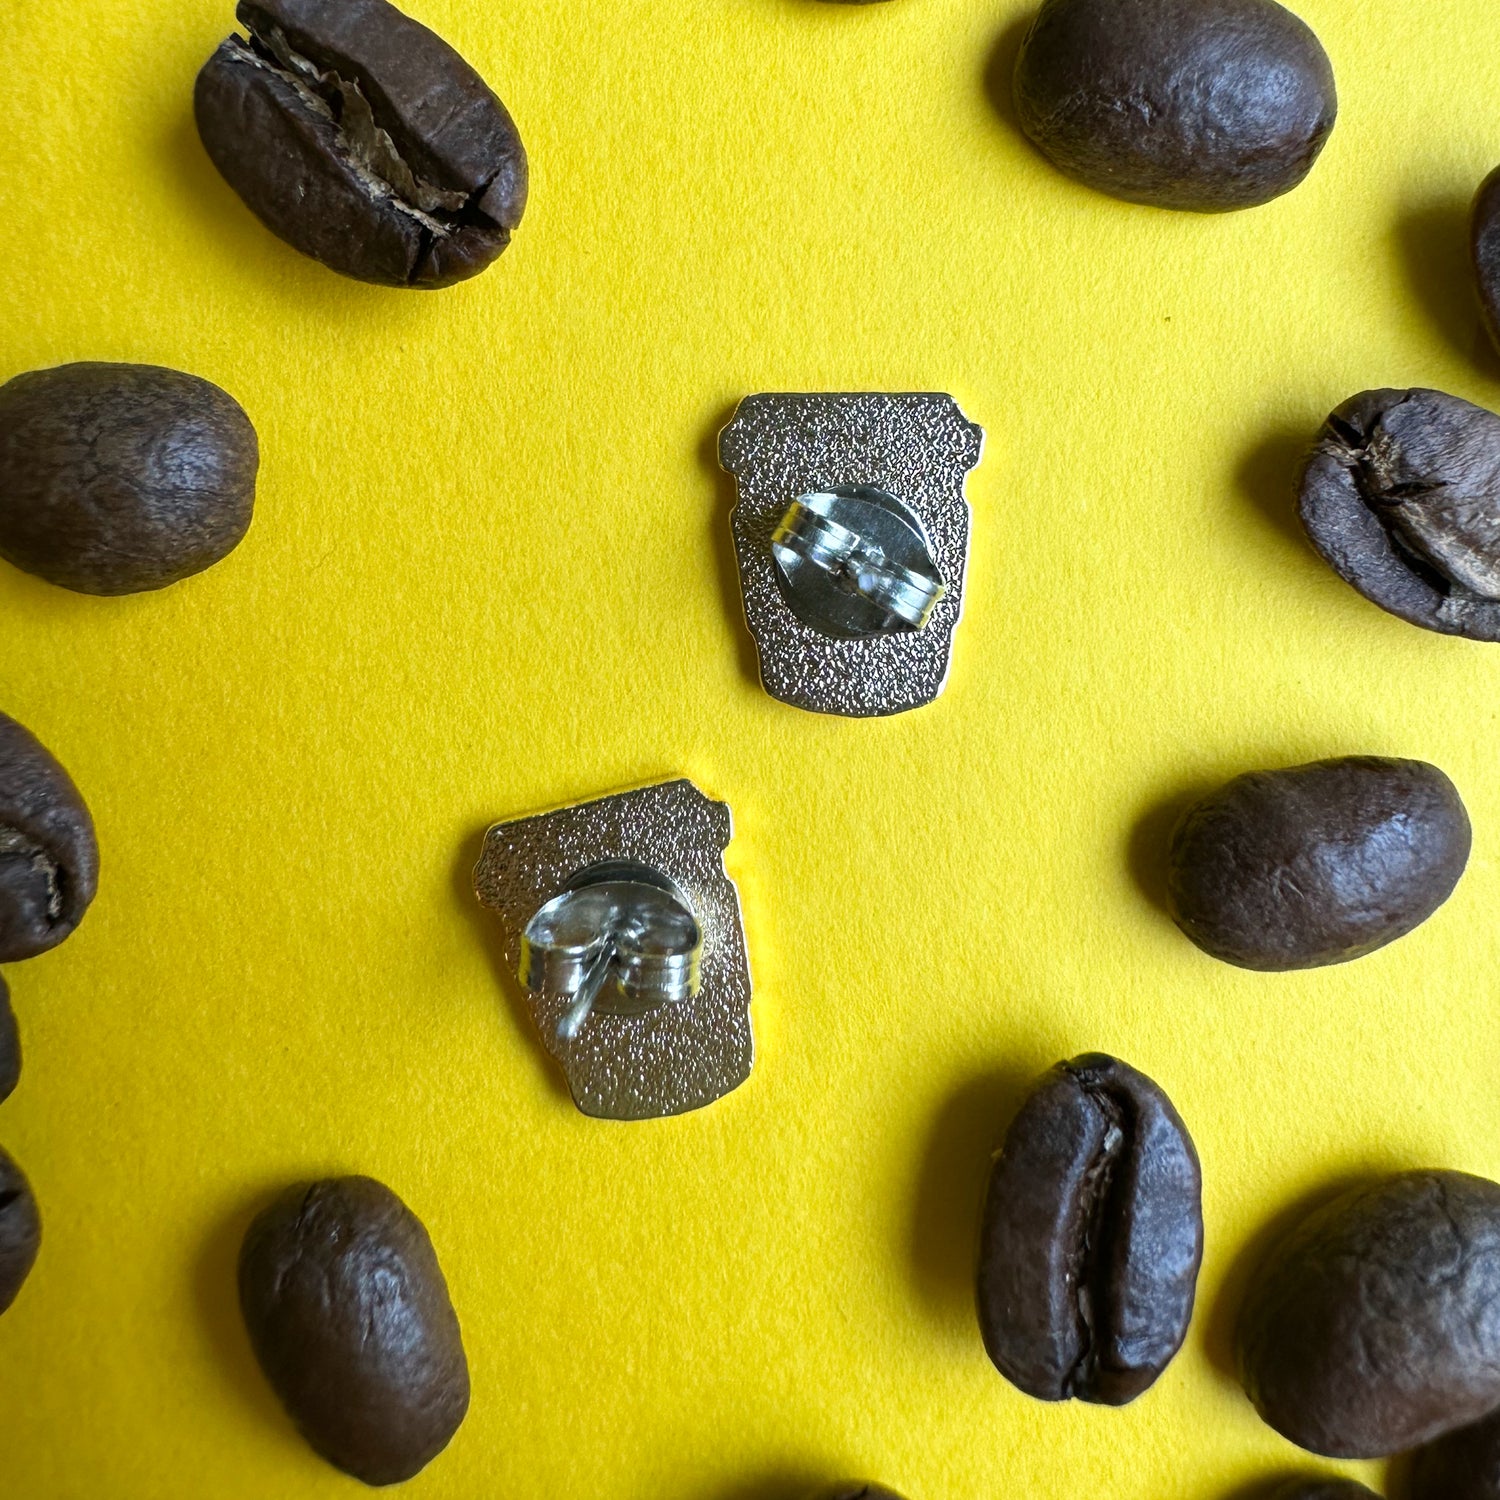 The back of the coffee cup earrings with metal butterfly backs on a yellow paper background covered in coffee beans